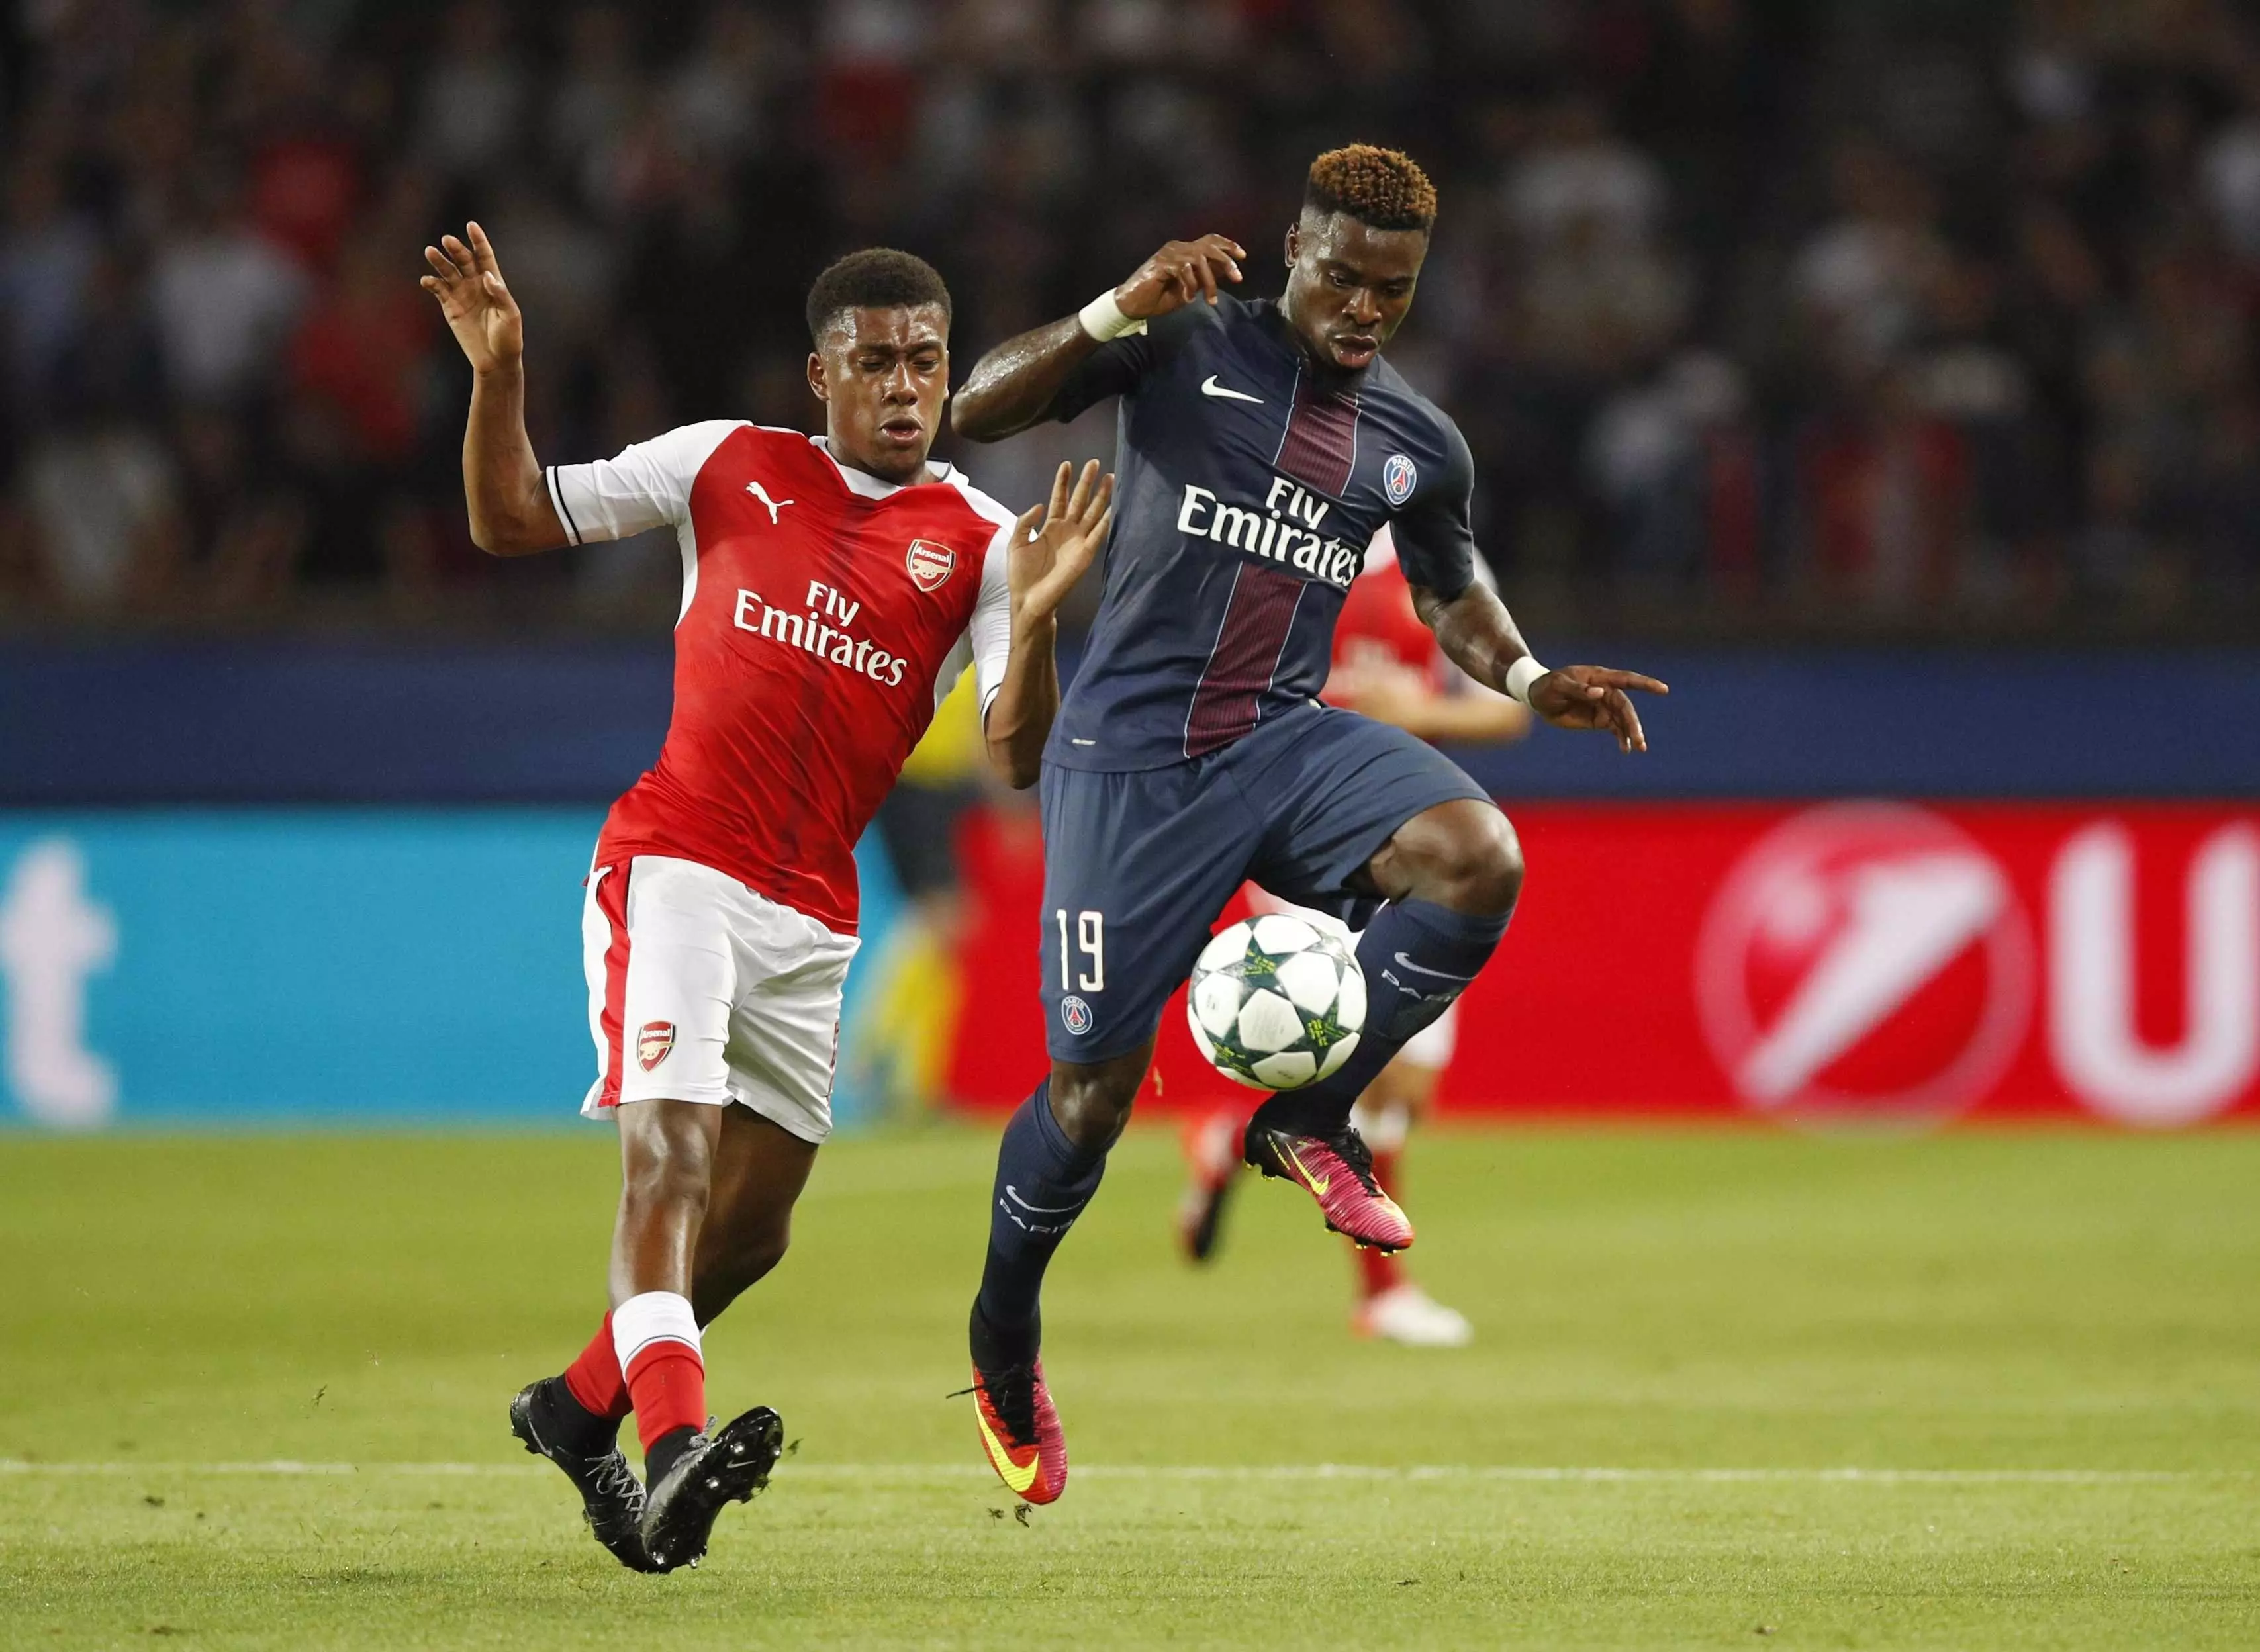 BREAKING: PSG Defender Serge Aurier Charged For Assaulting Police Officer